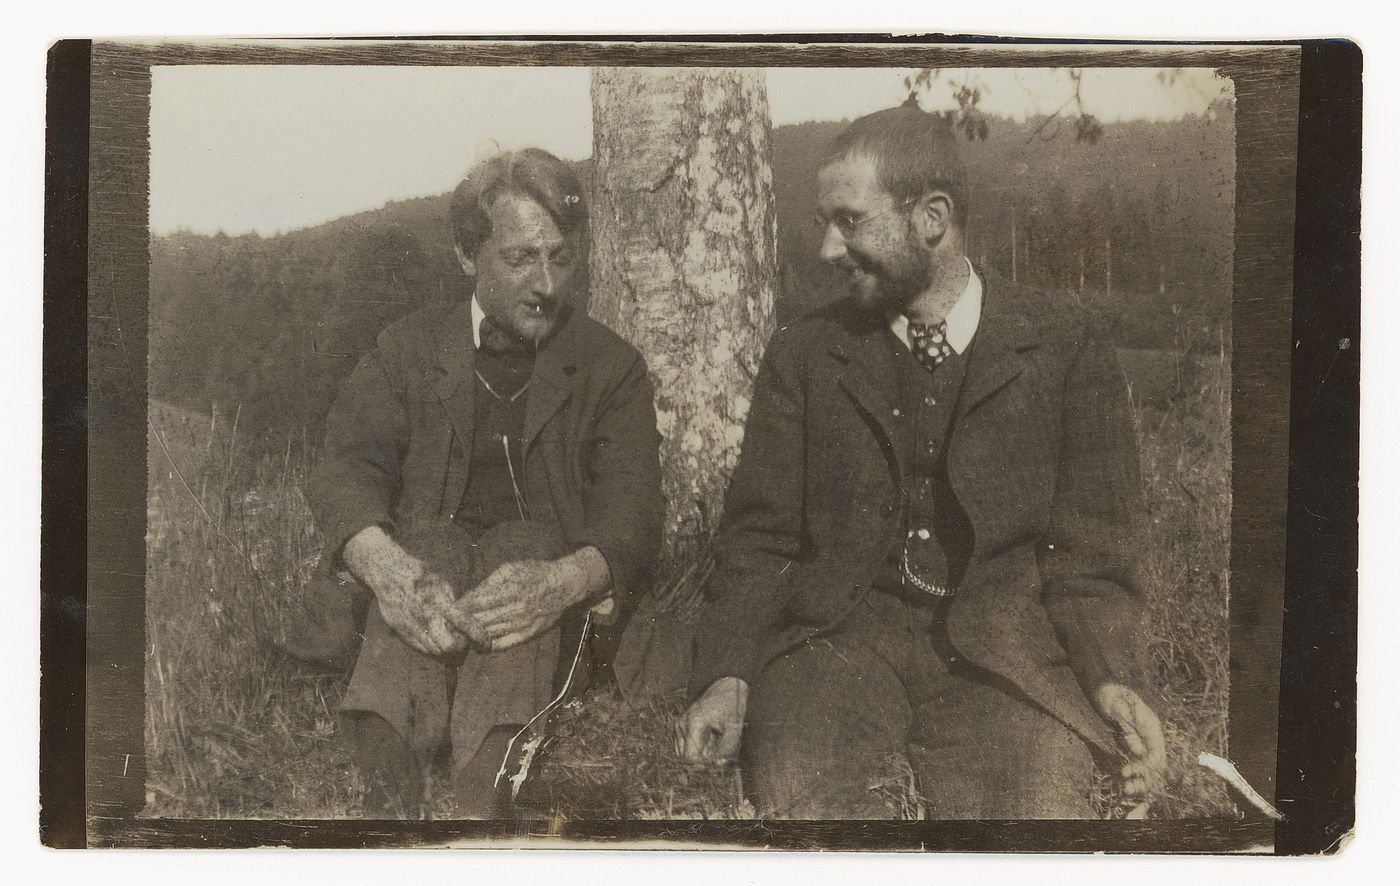 Photograph of Professor Karl Rade and Paul Goesch sitting under a tree, in Dresden